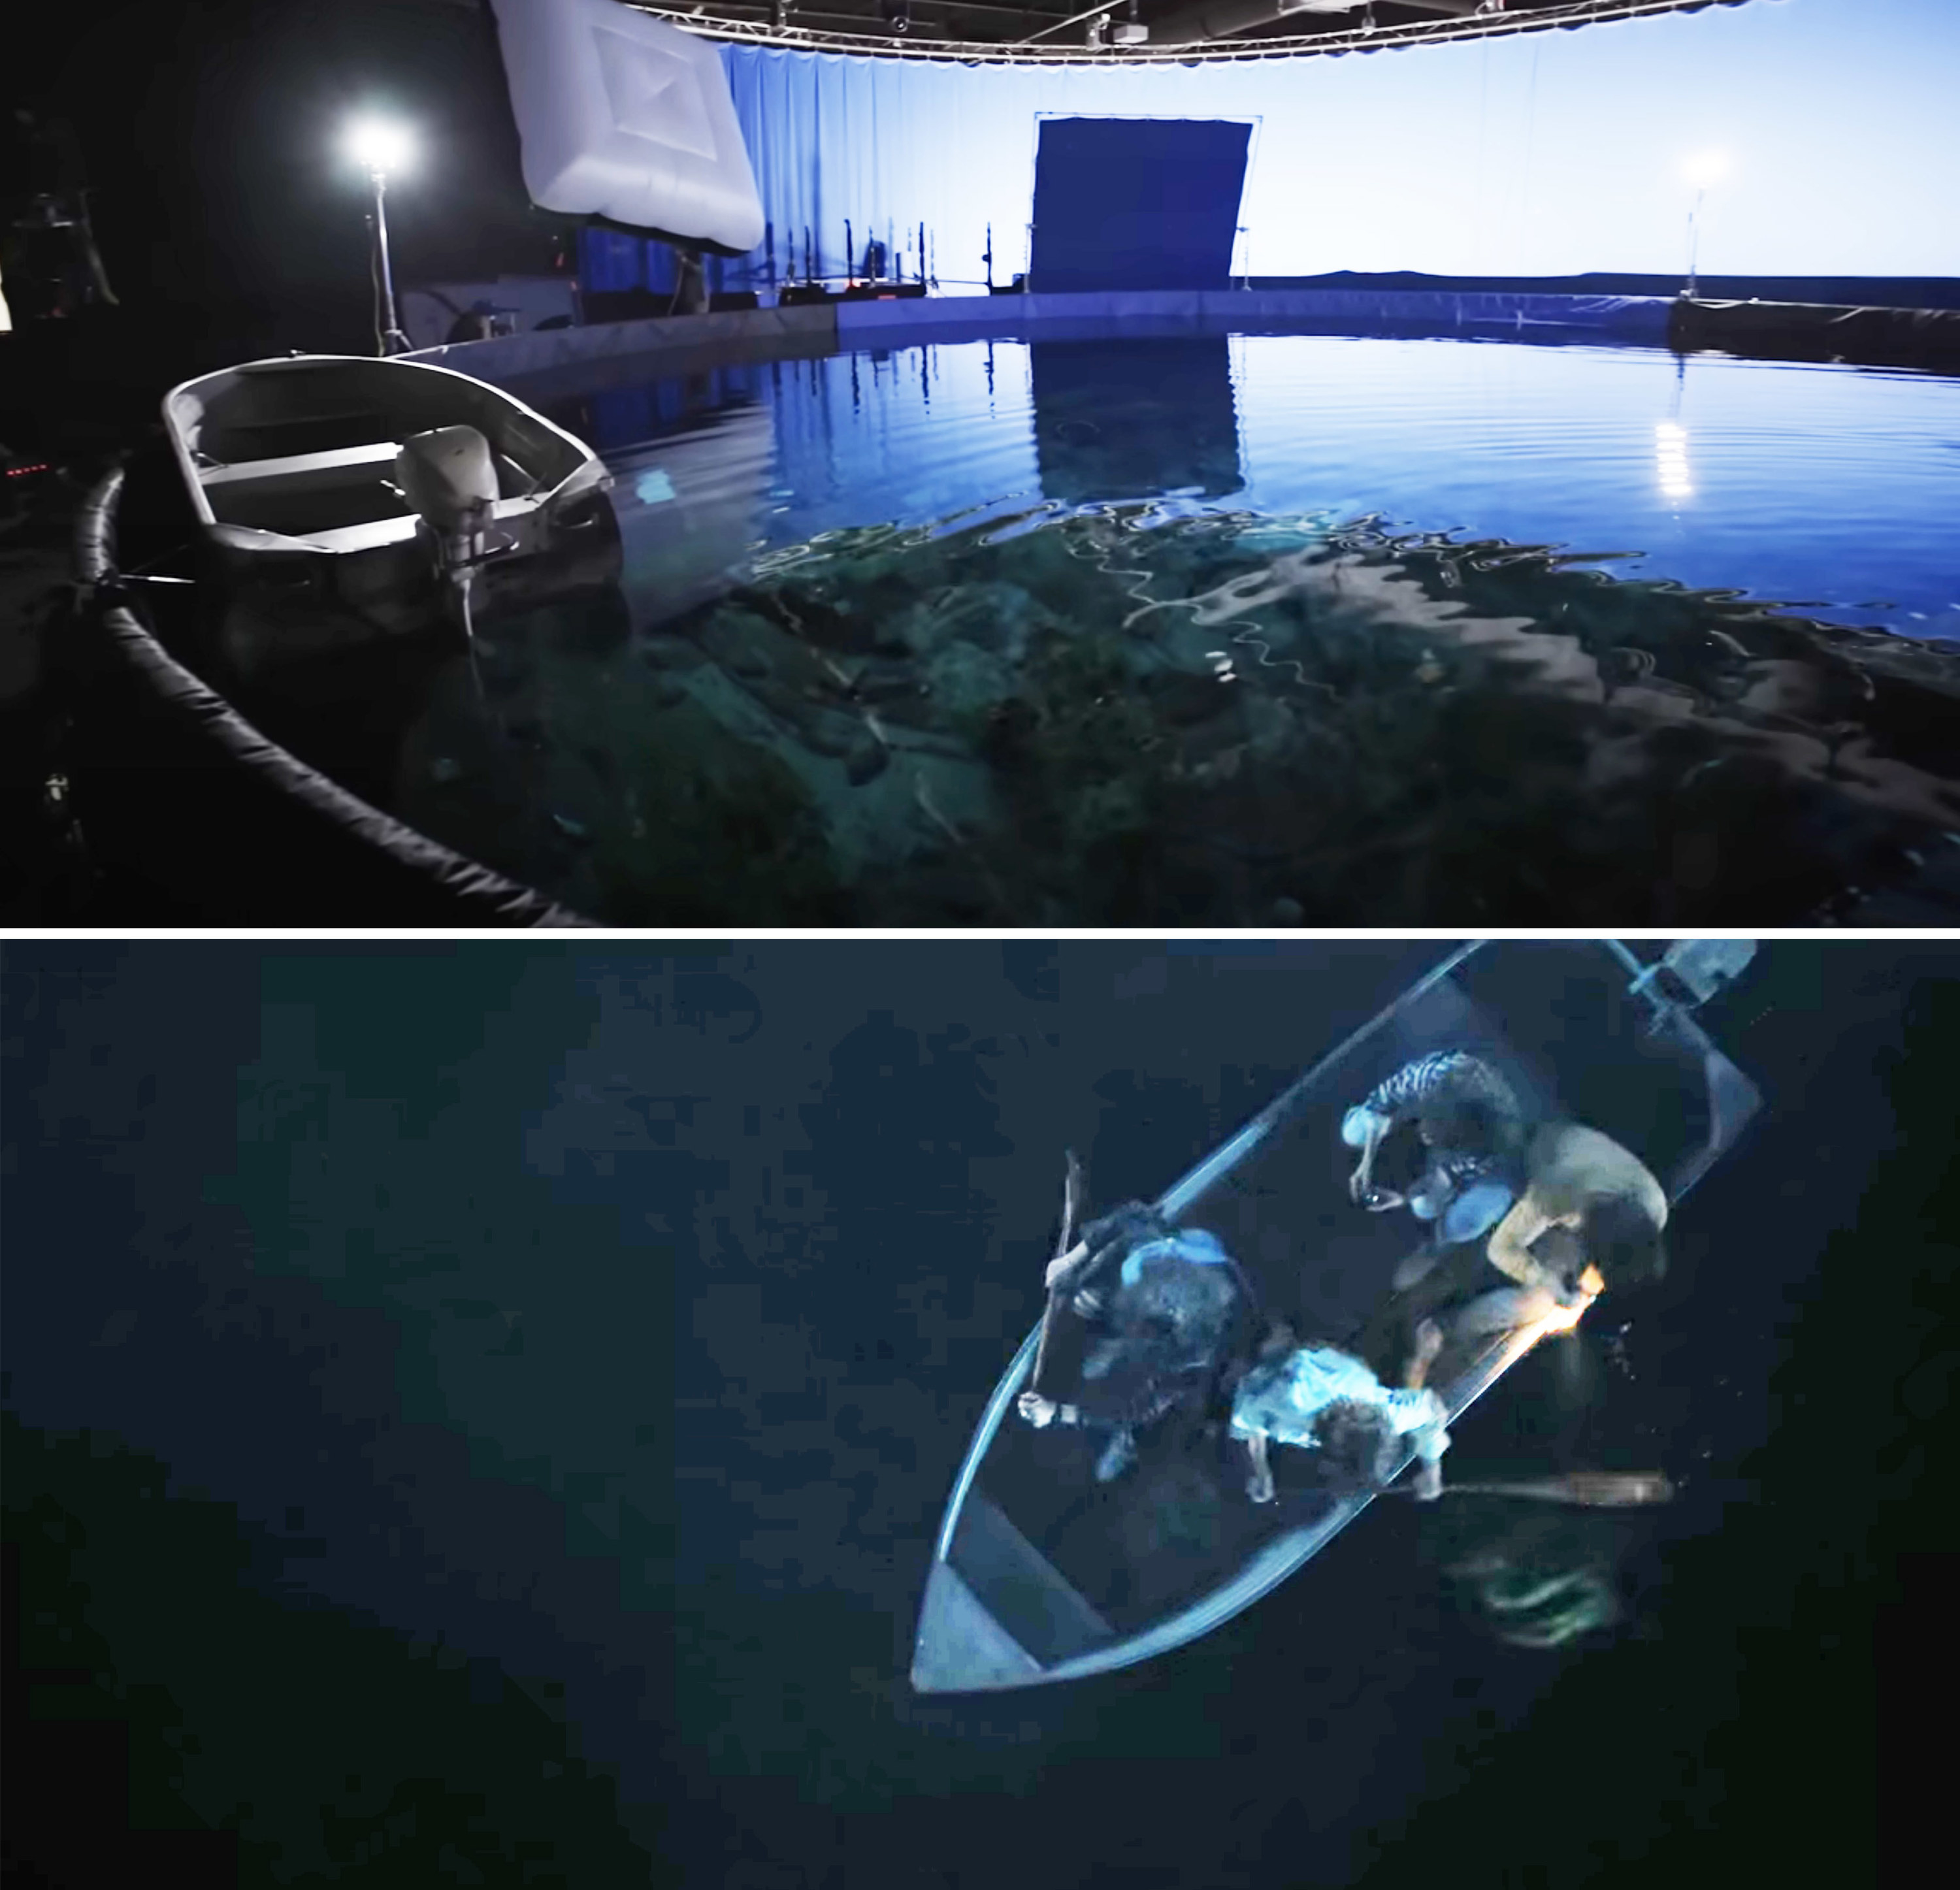 A huge pool in front of a blue screen on a soundstage with a boat